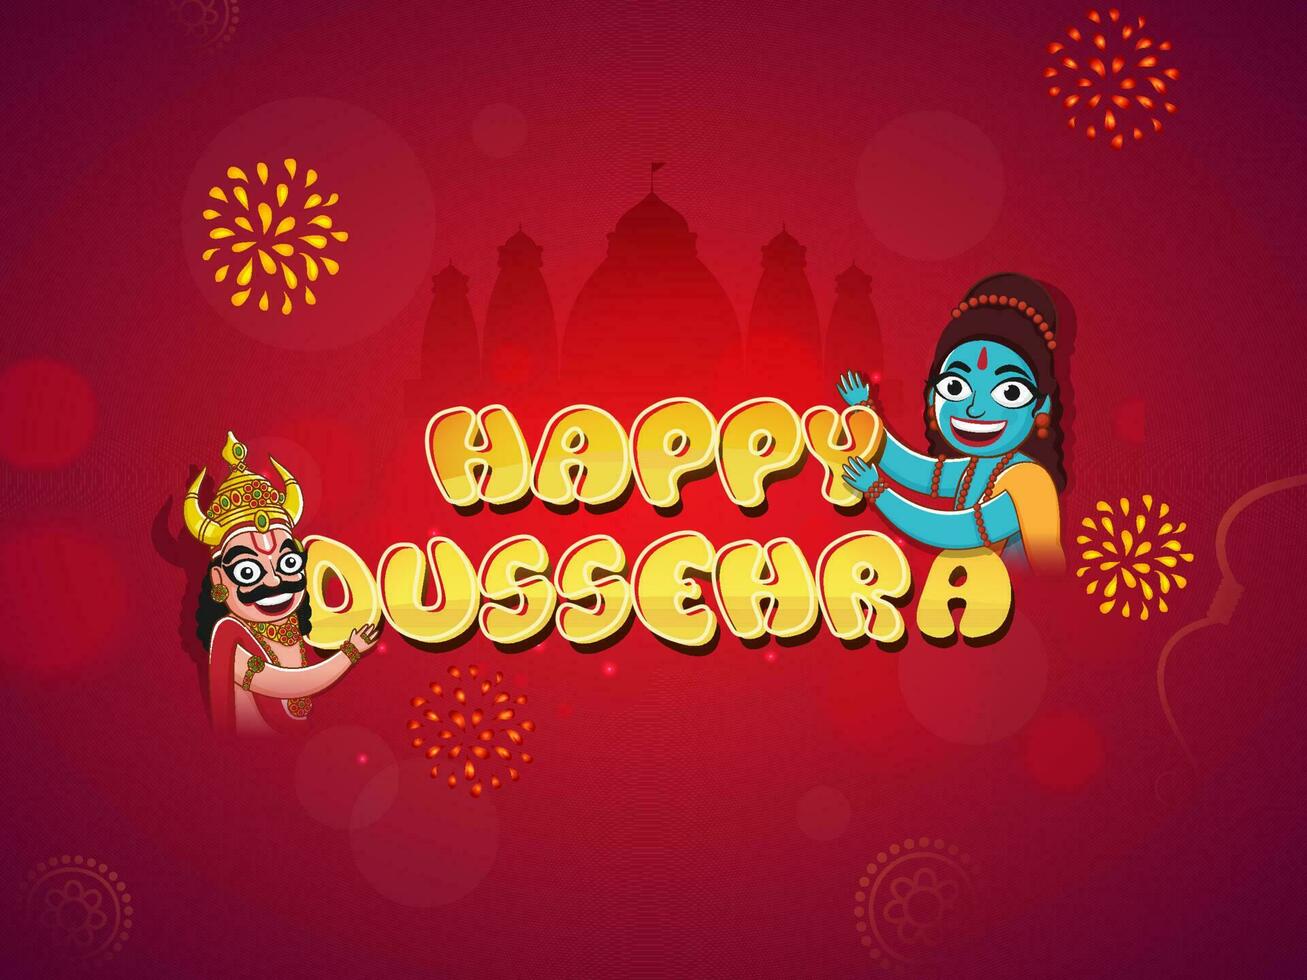 Happy Dussehra Font With Cheerful Lord Rama, Demon Ravana Character On Gradient Red And Pink Silhouette Ayodhya View Background. vector